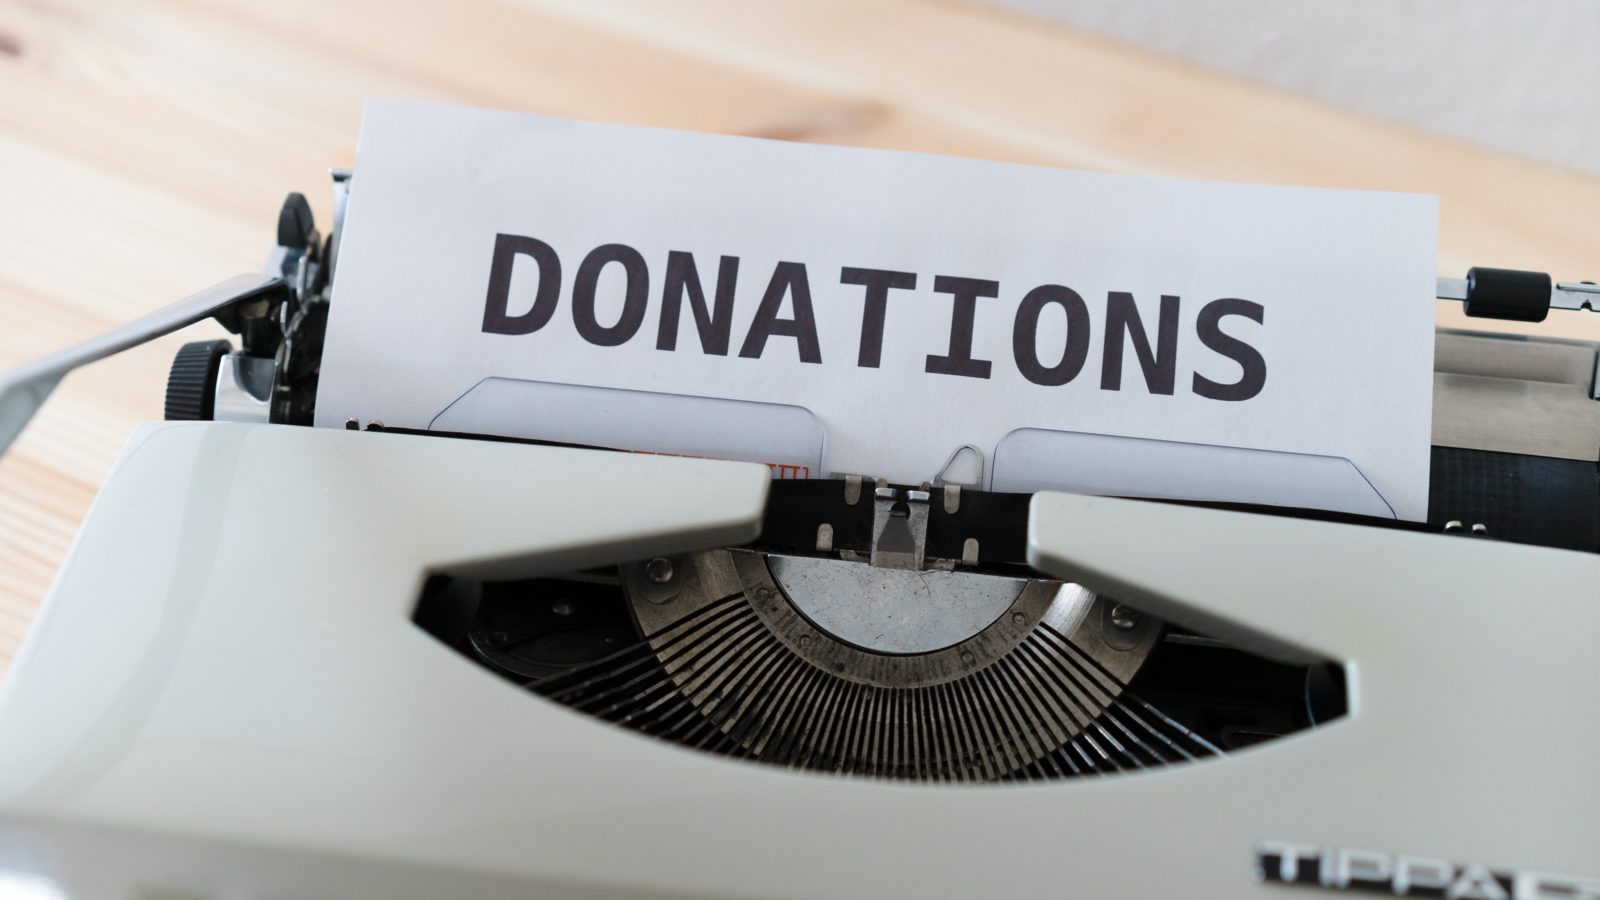 Donations image representing tax liitigation